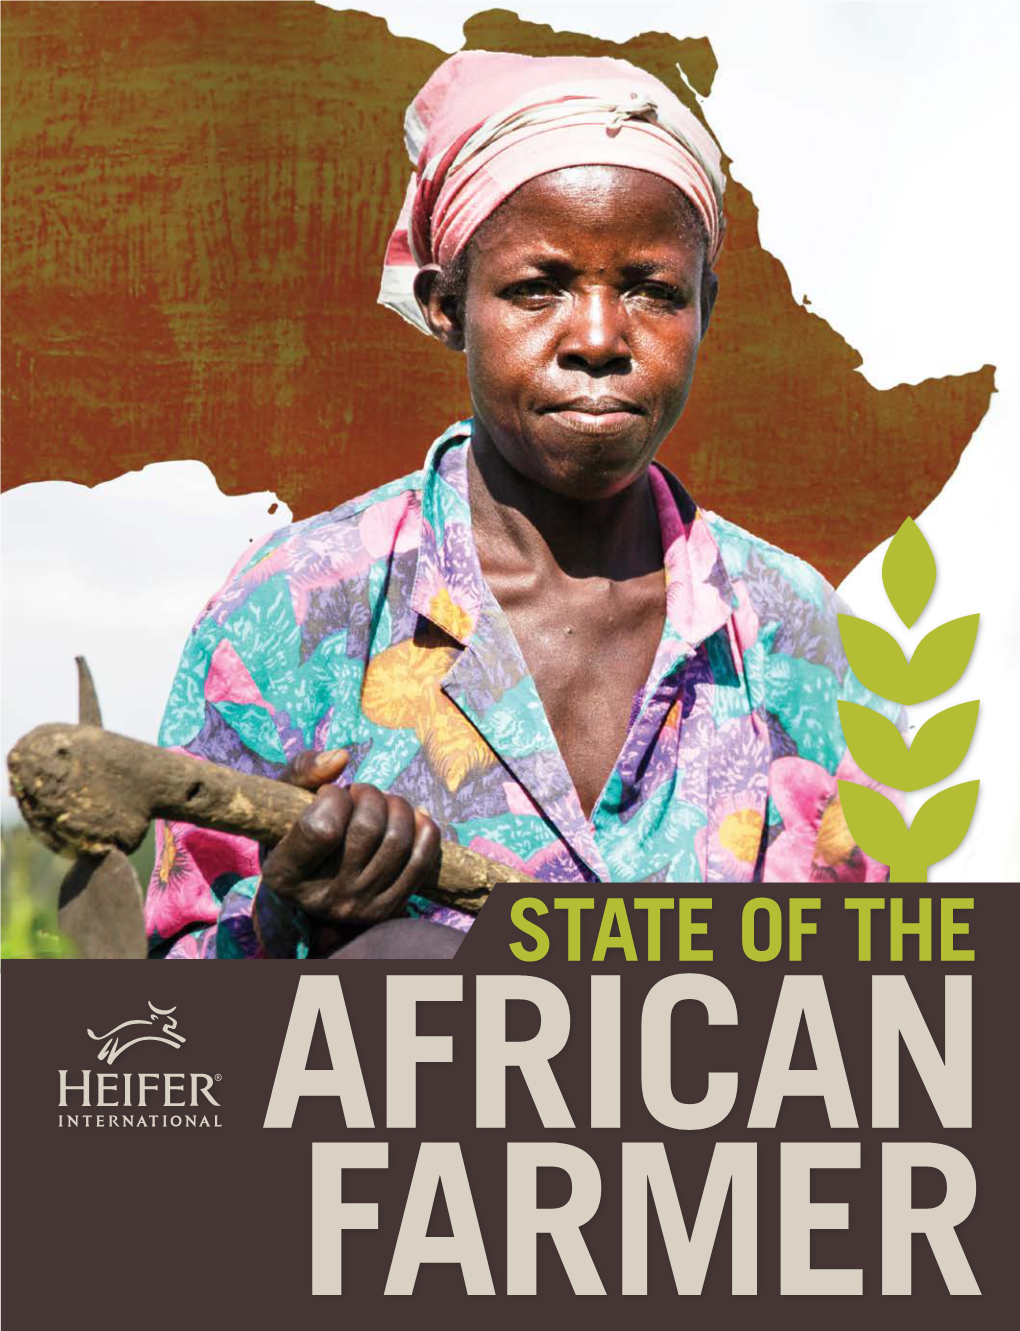 State of the African Farmer About Heifer International